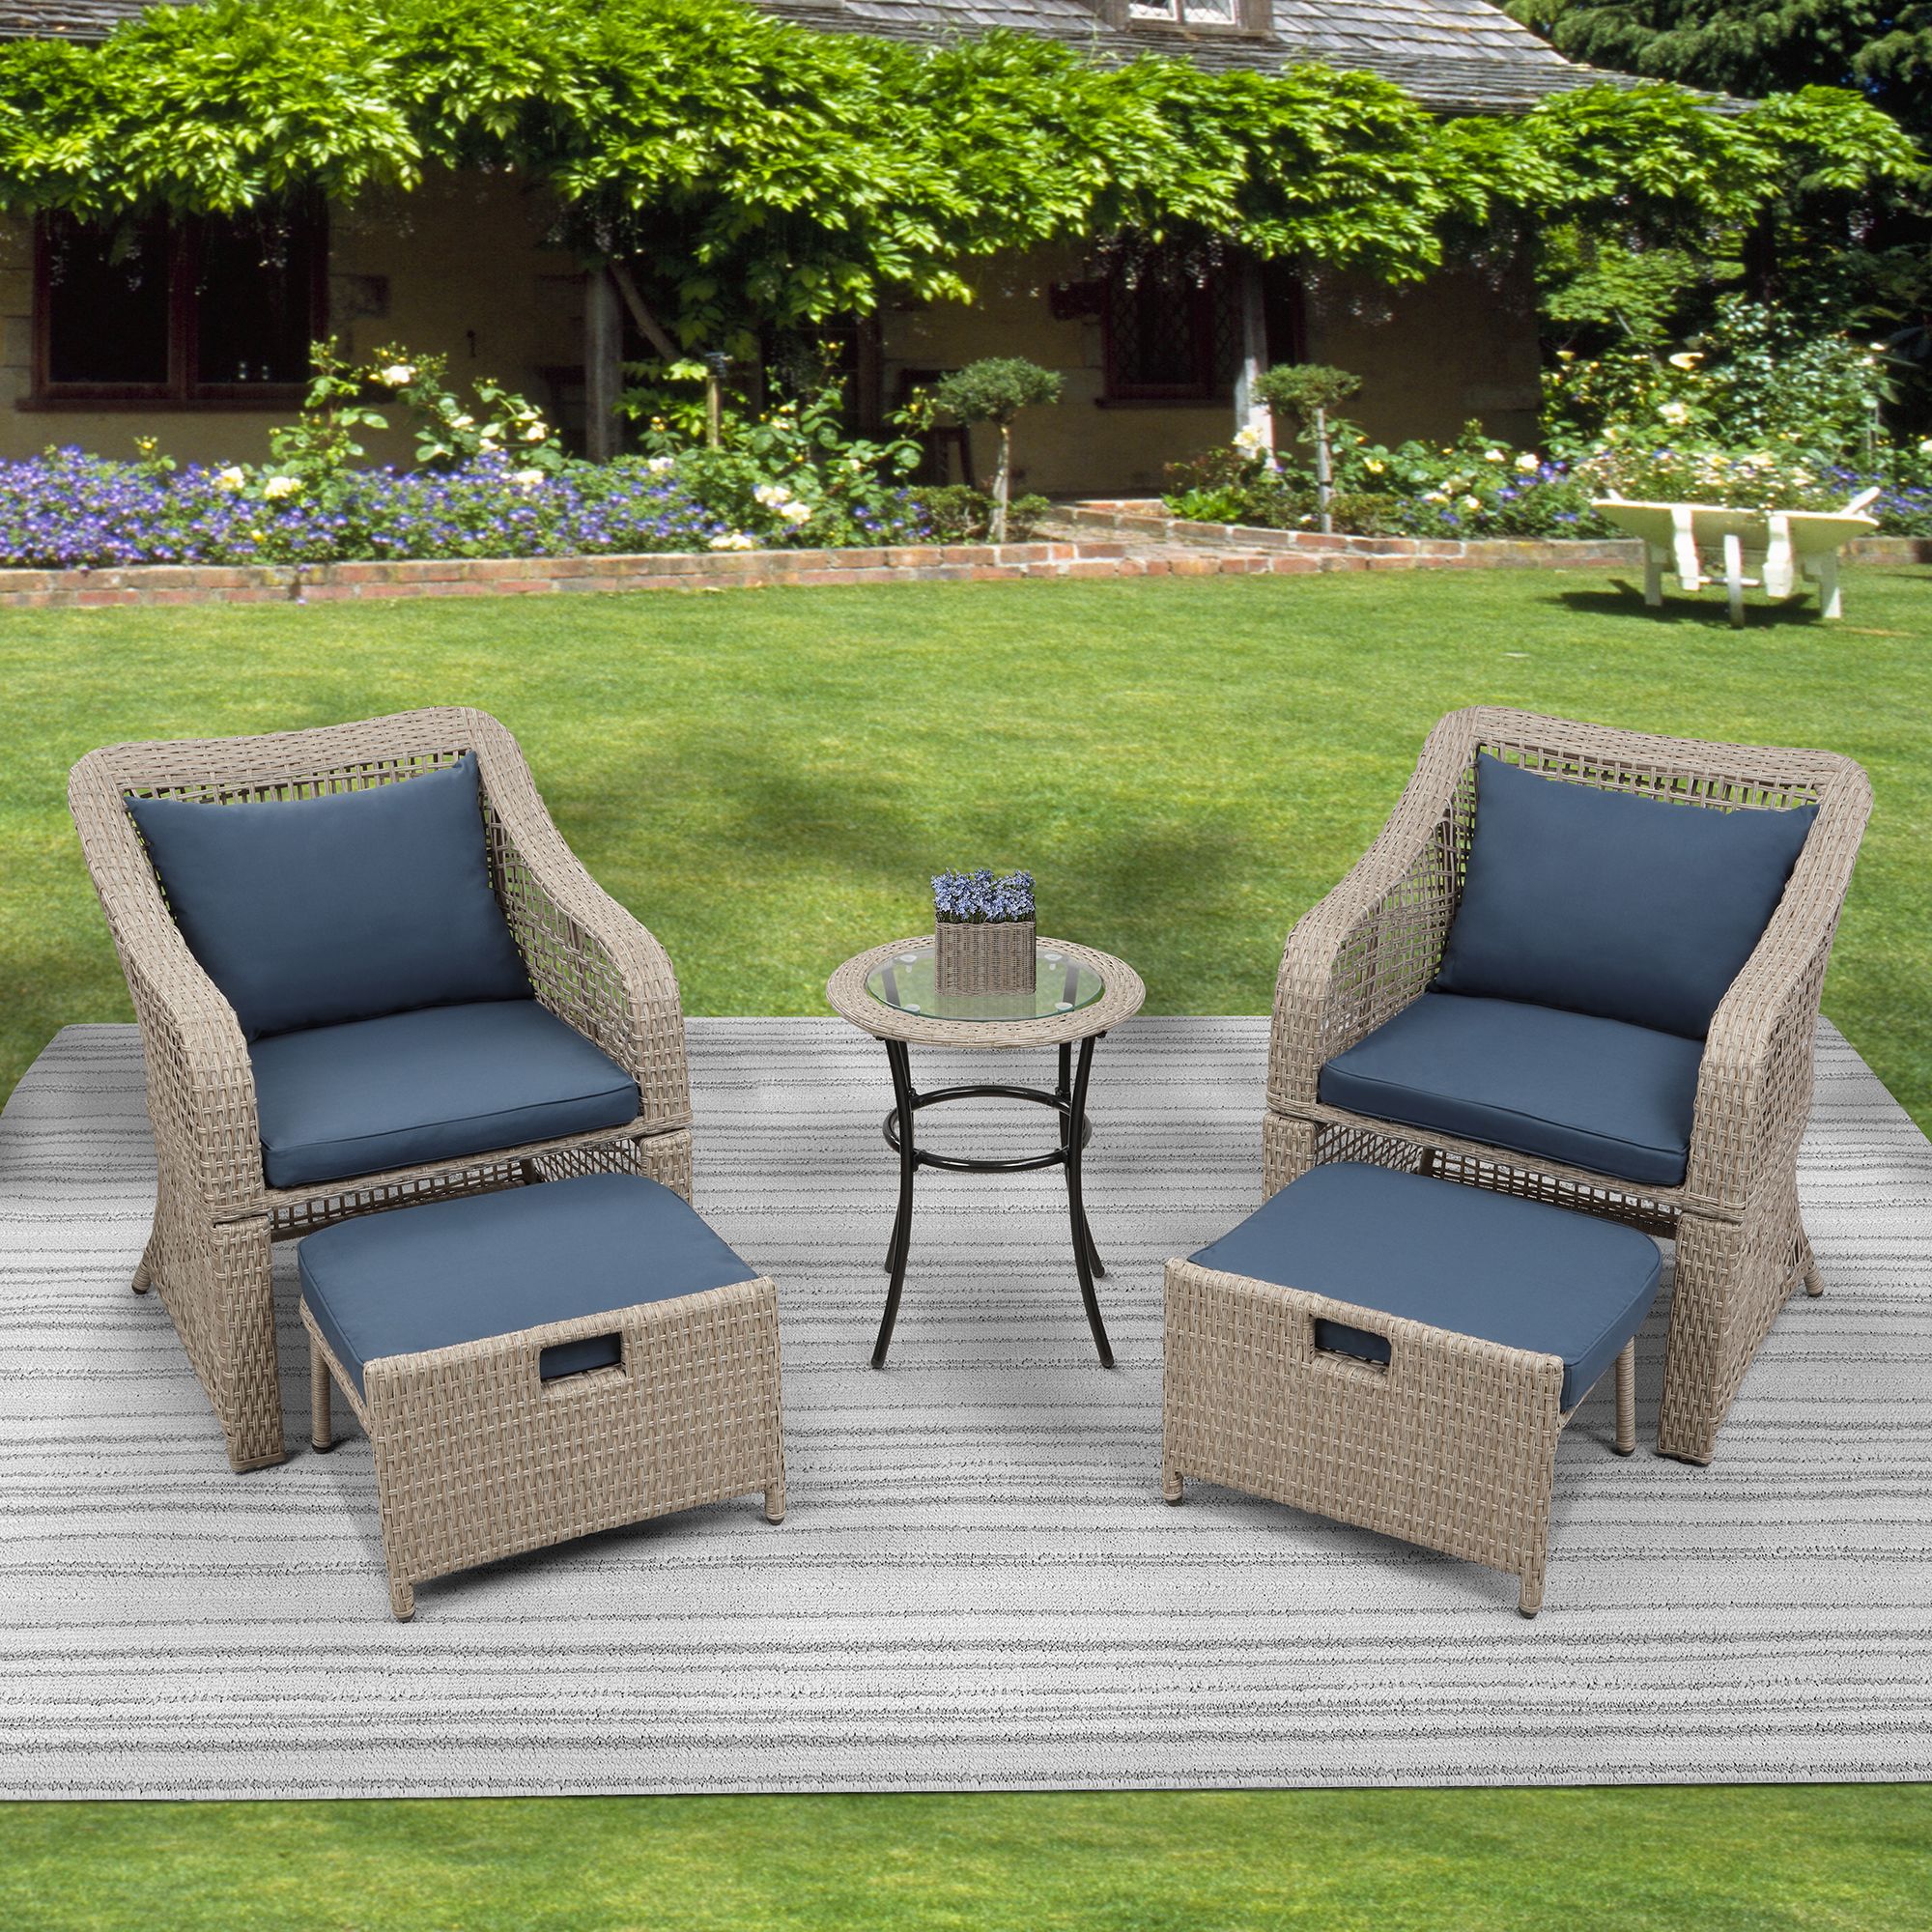 Outdoor Patio Furniture Sets, 5 Piece Wicker Patio Bar Set, 2pcs Arm Throughout Most Recent Natural Woven Outdoor Chairs Sets (View 15 of 15)